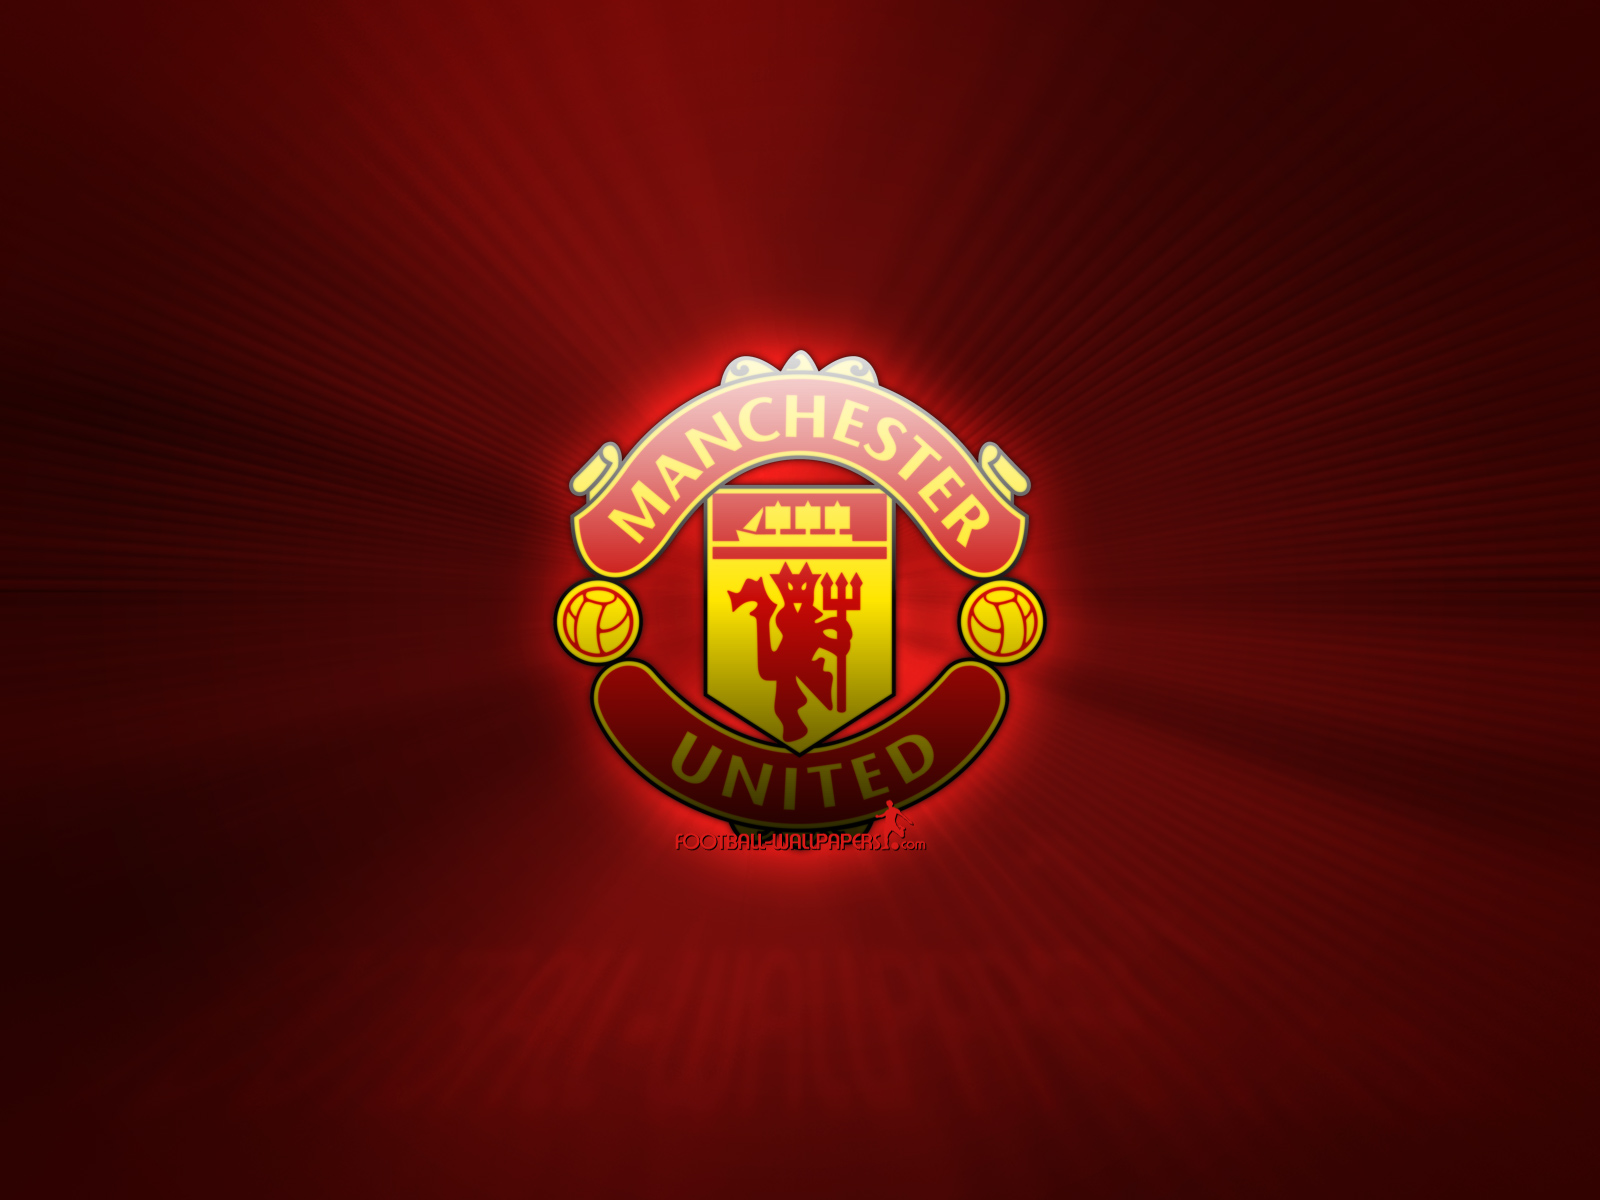 Amazing Manchester United F.C. Pictures & Backgrounds